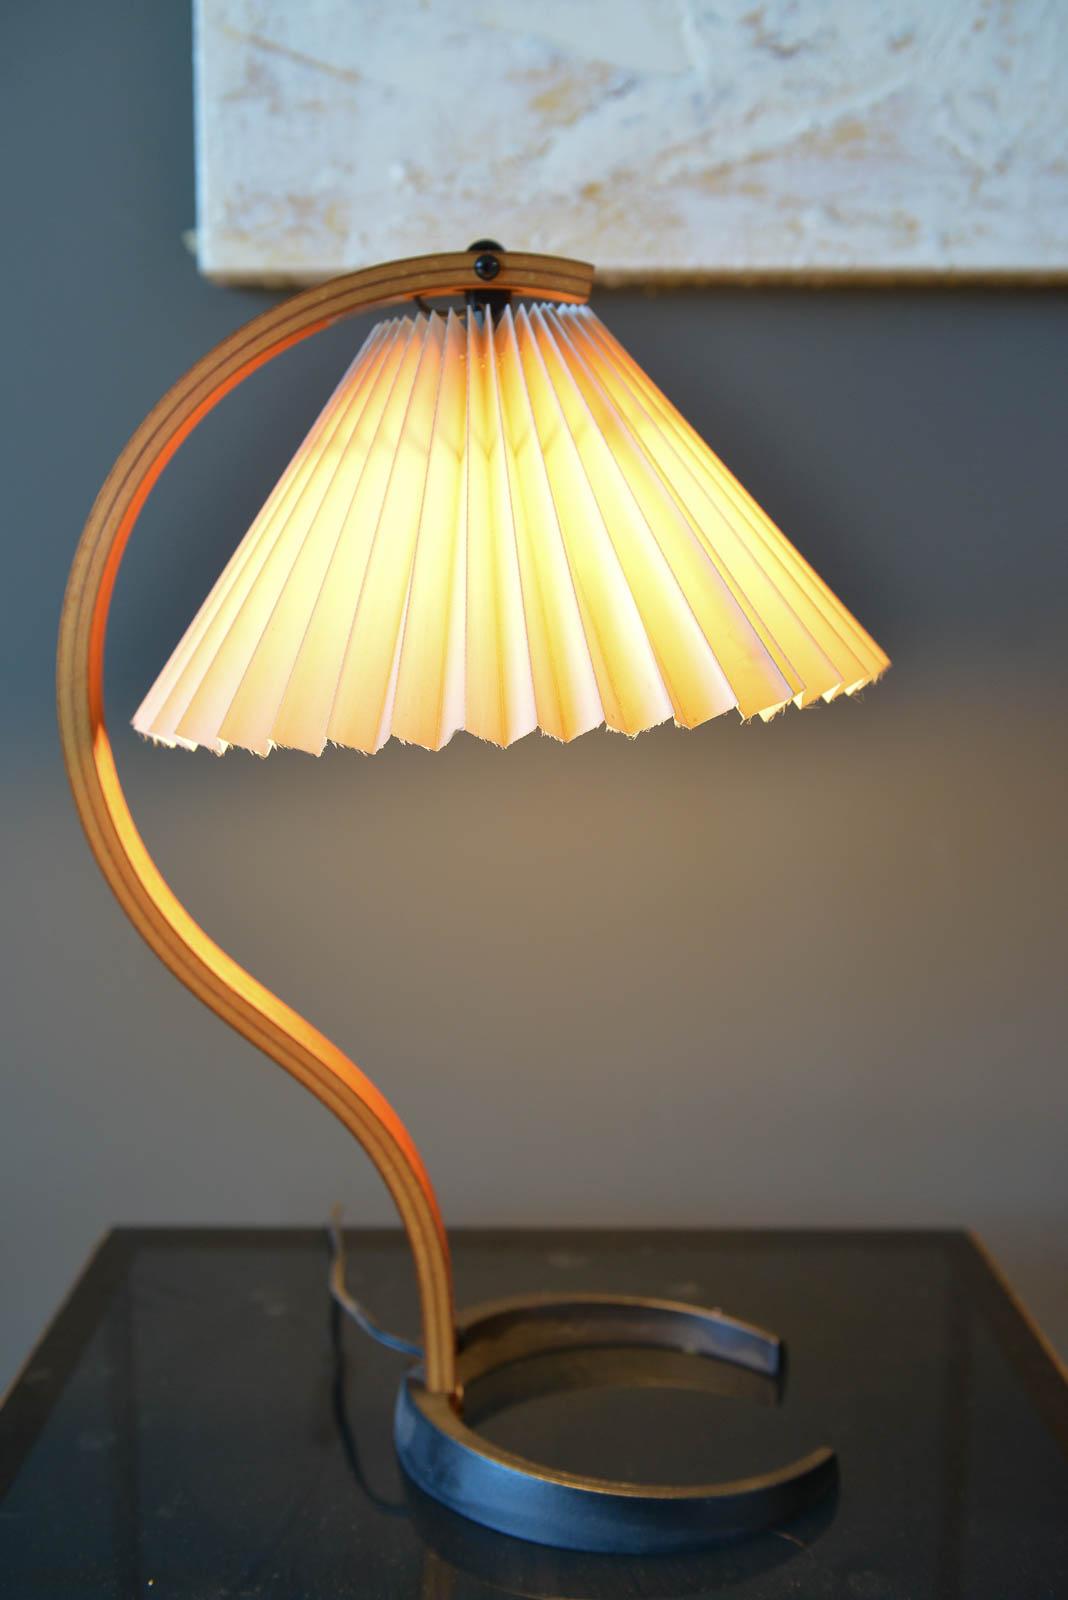 Mads Caprani table lamp, circa 1971 by Danish manufacturer Caprani Light AS. This vintage lamp features sculptural bent plywood stand with en elegant curve, a cast iron crescent shaped base, and original pleated linen shade. Original switch and